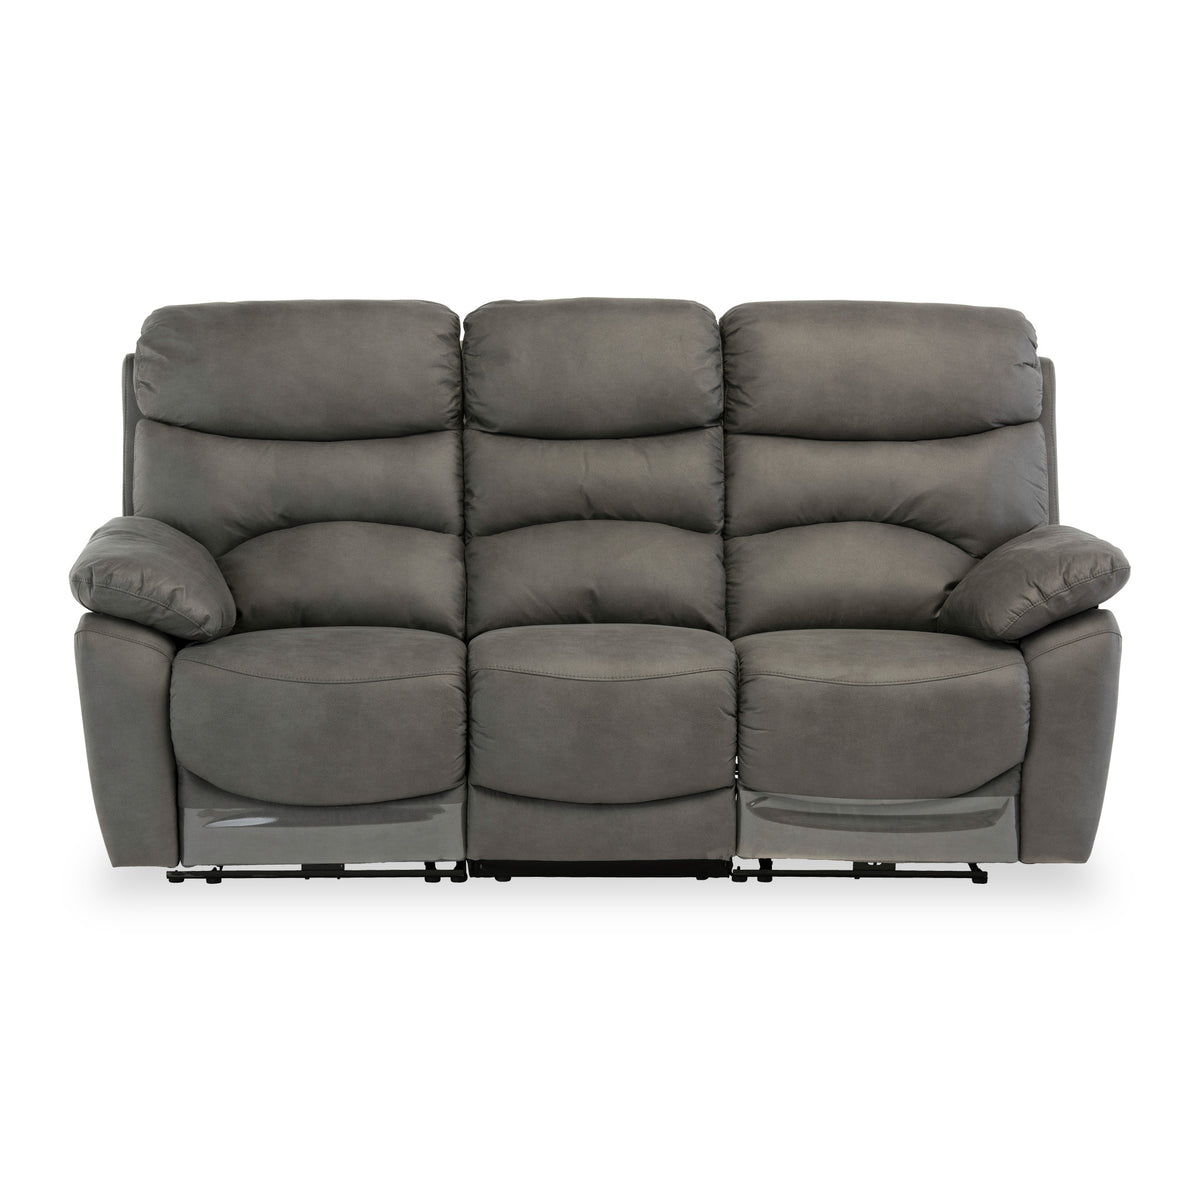 Fraser Grey Fabric Electric Reclining 3 Seater Sofa from Roseland Furniture